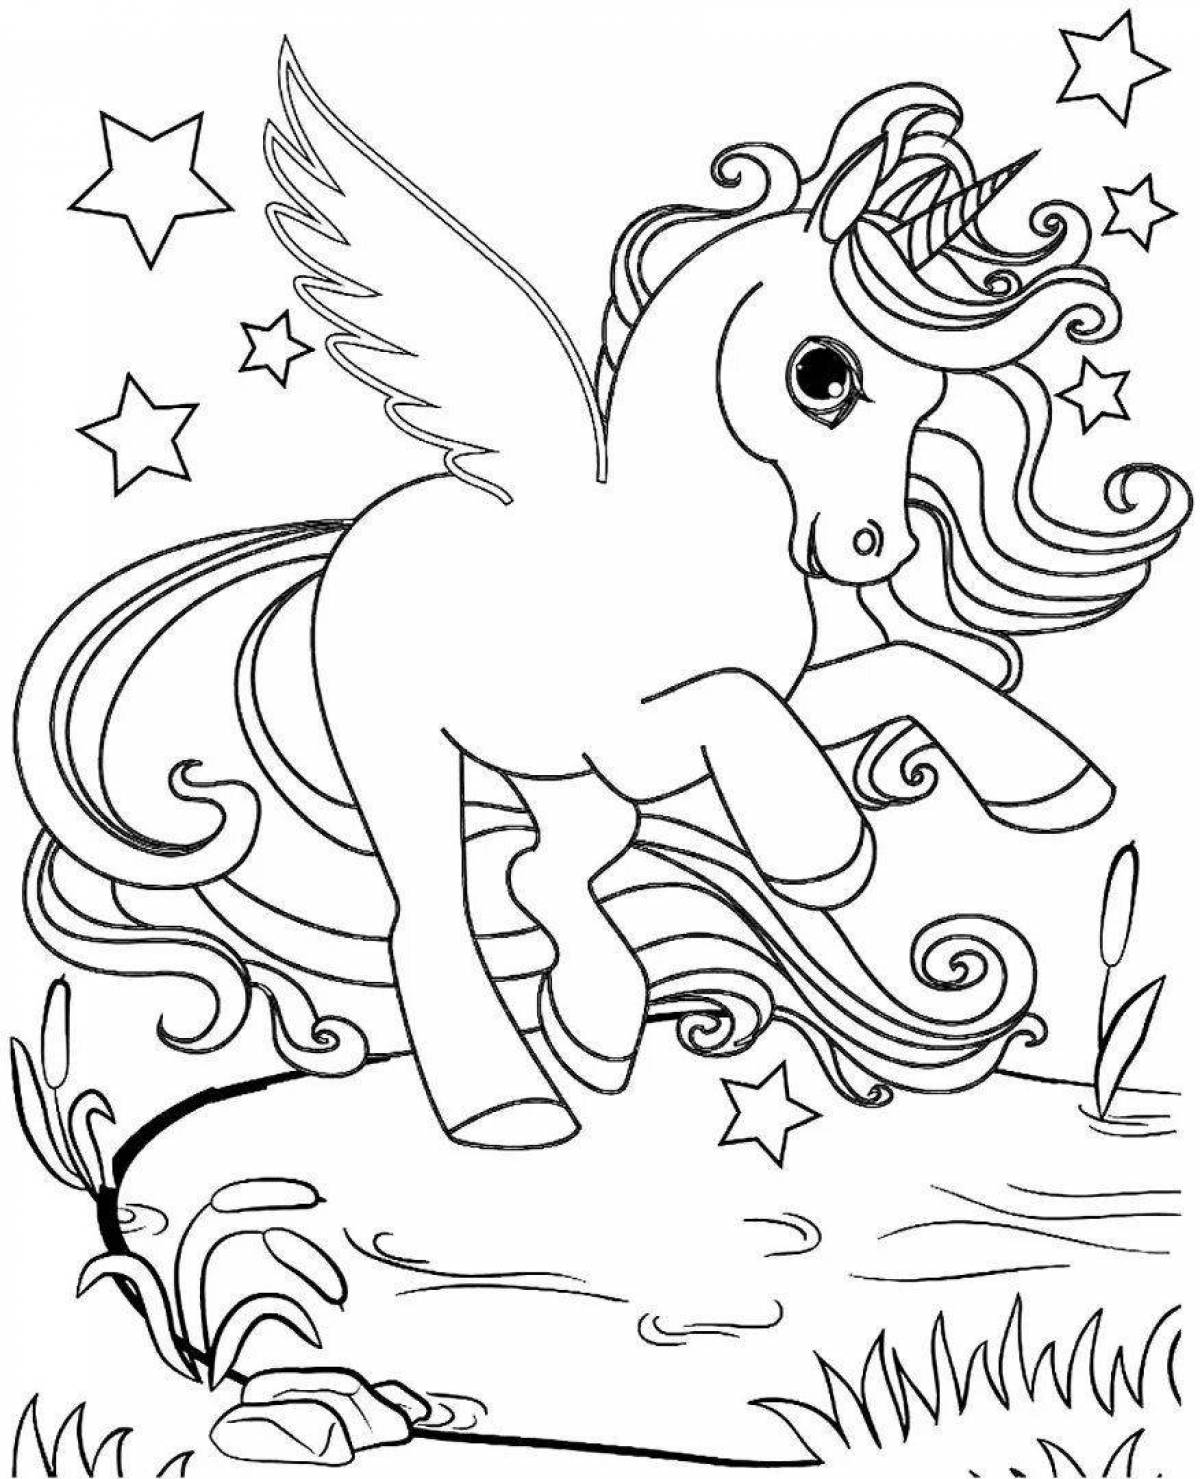 Cute unicorn coloring book for kids 4 5